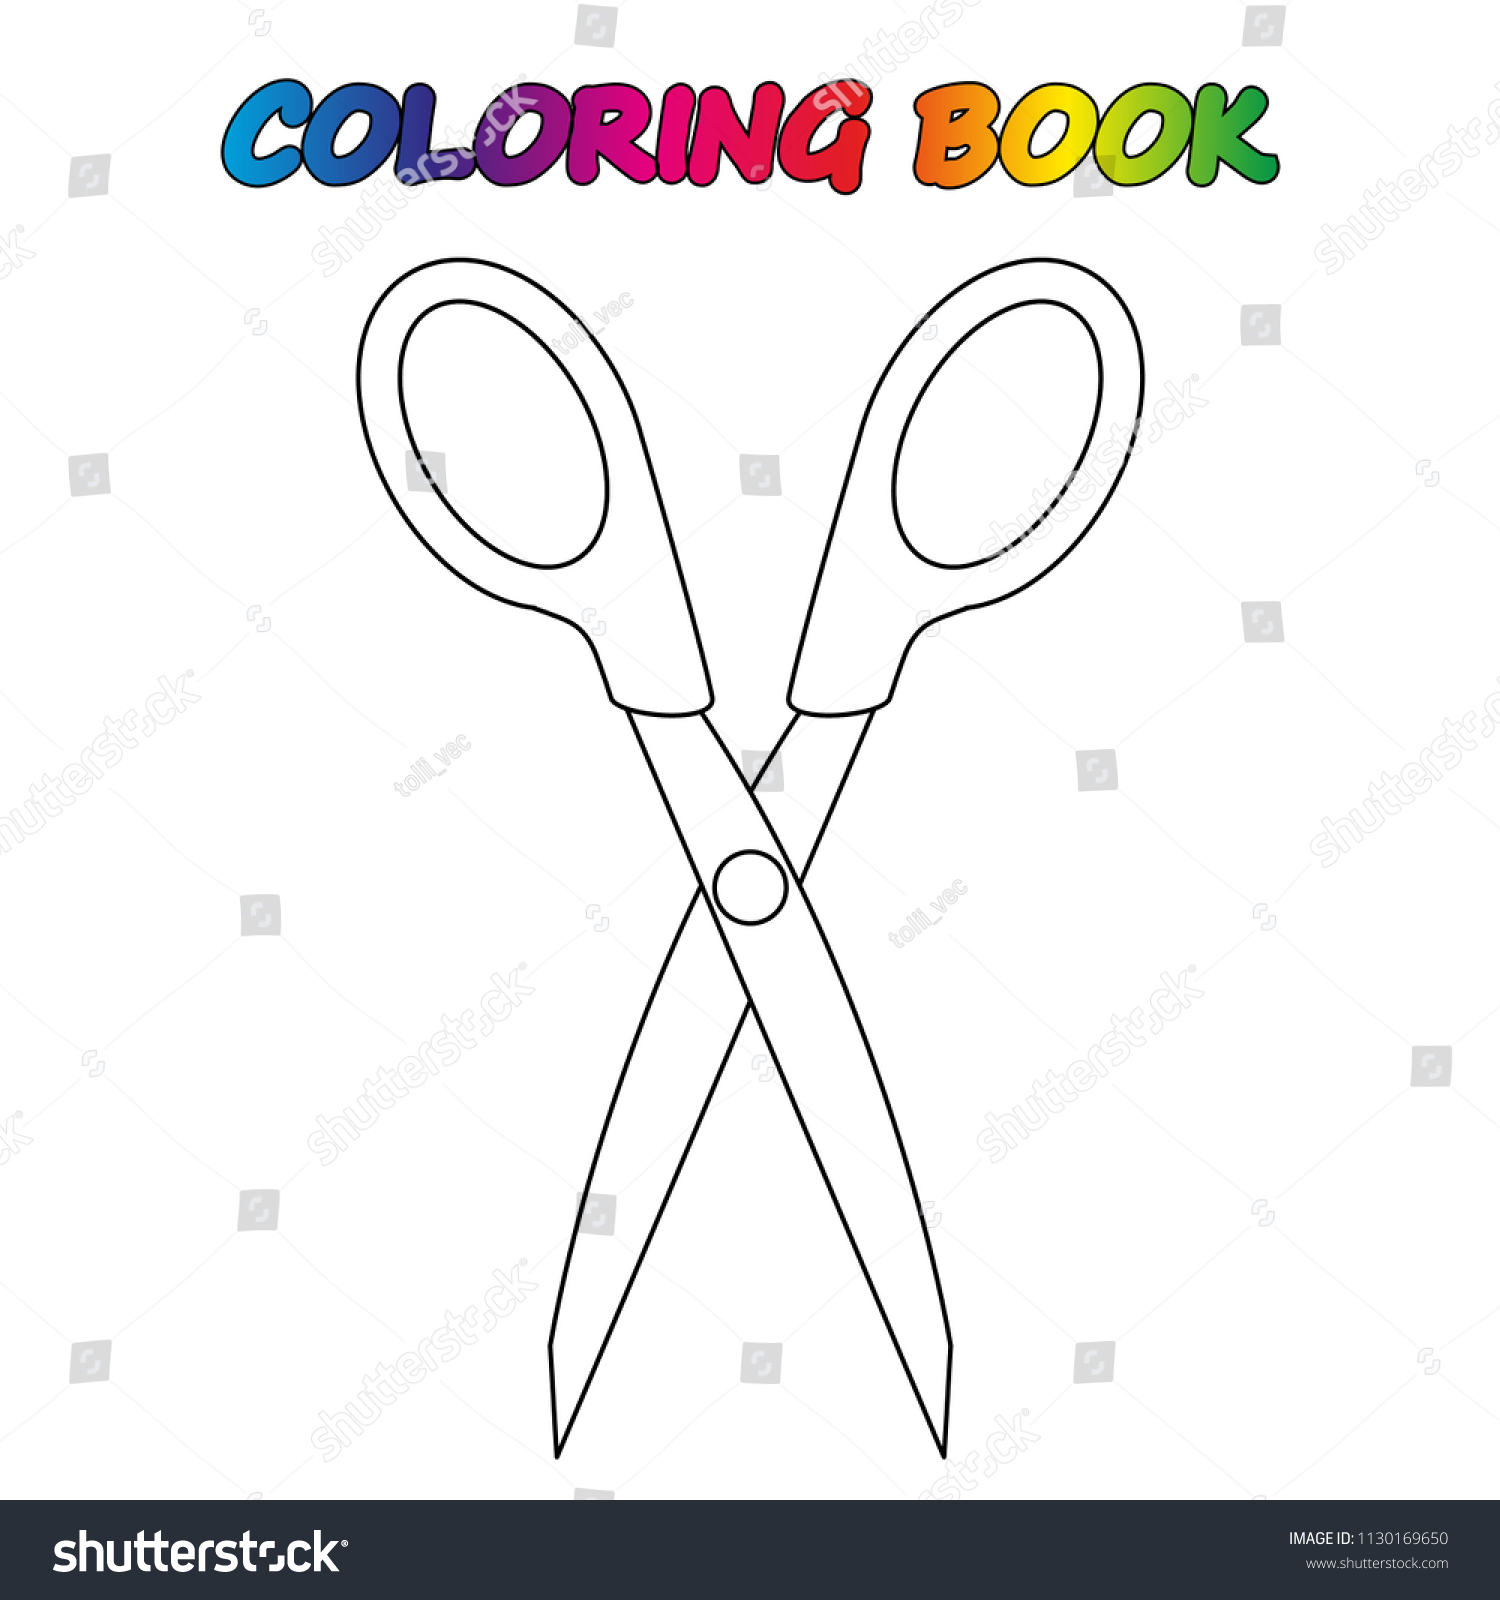 Scissors coloring book coloring page educate stock vector royalty free